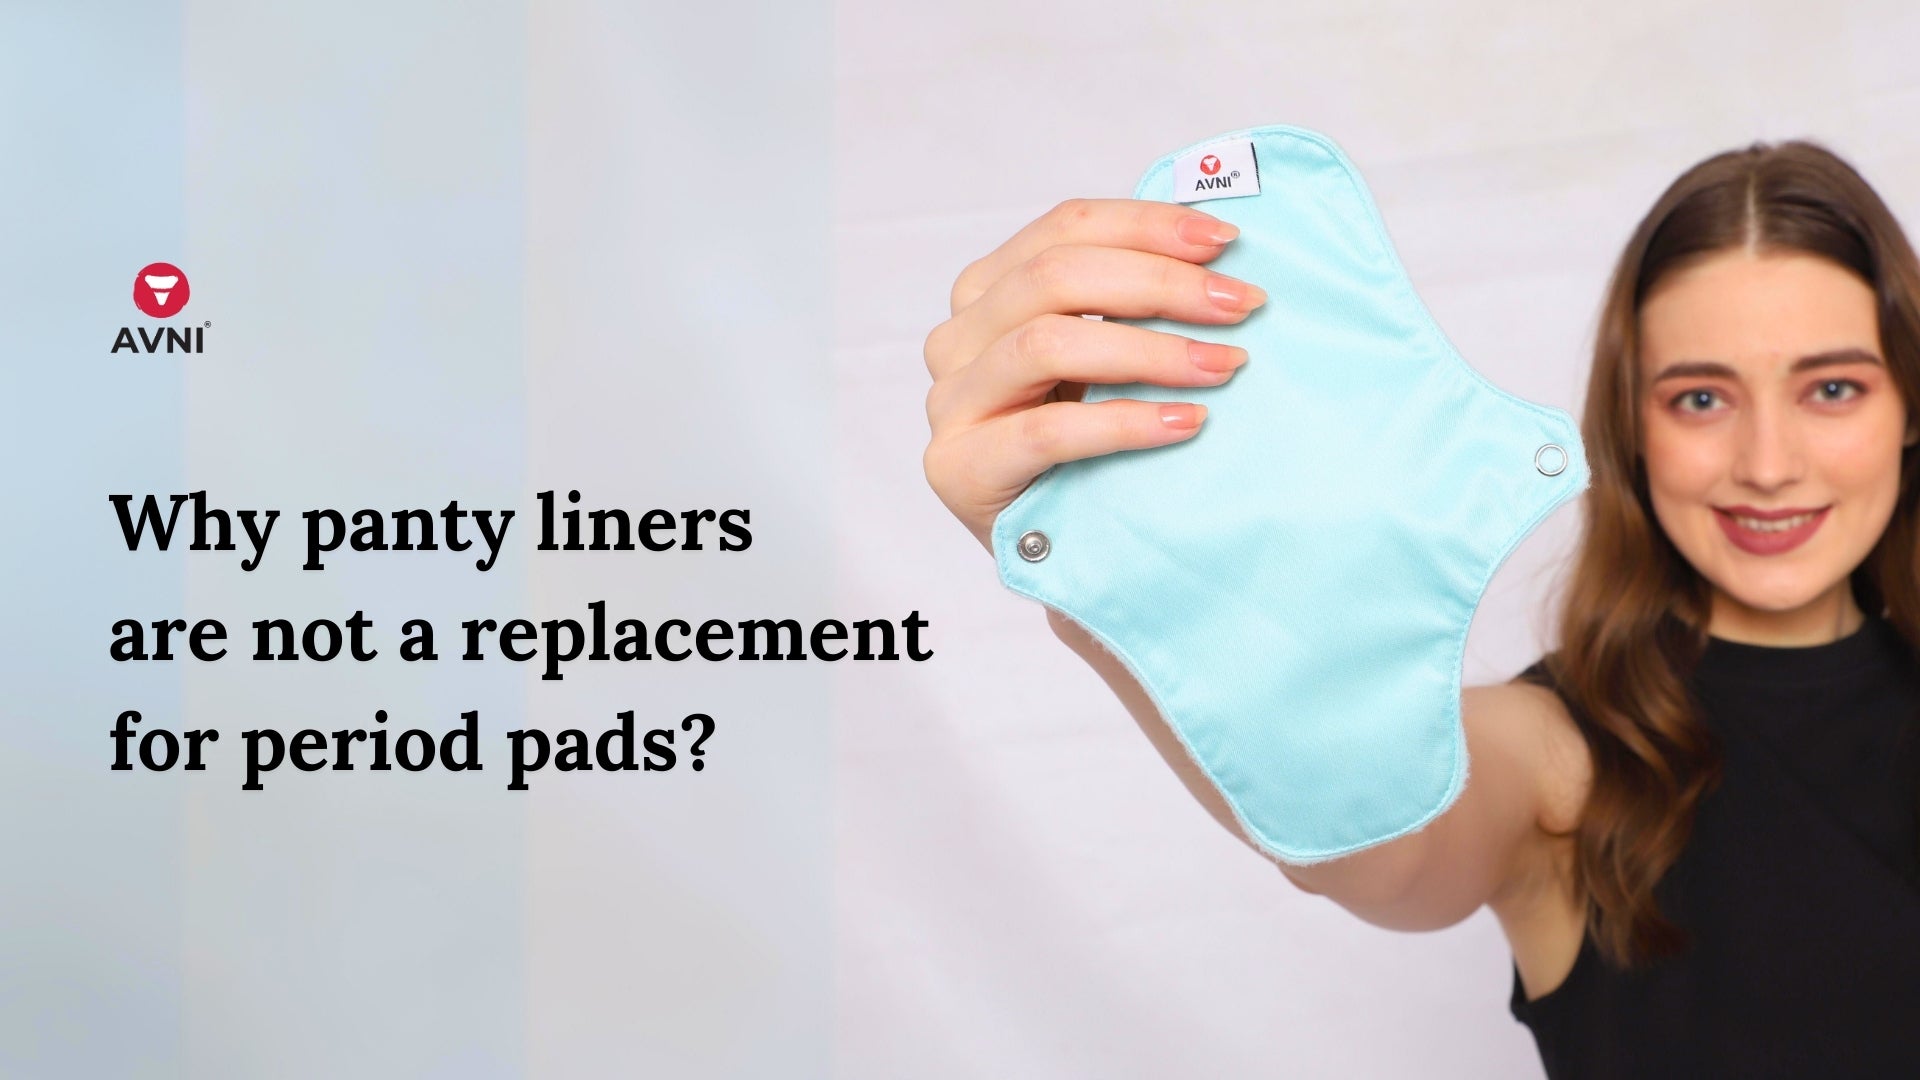 http://www.myavni.com/cdn/shop/articles/Why_panty_liners_are_not_a_replacement_for_period_pads.jpg?v=1704308860&width=2048